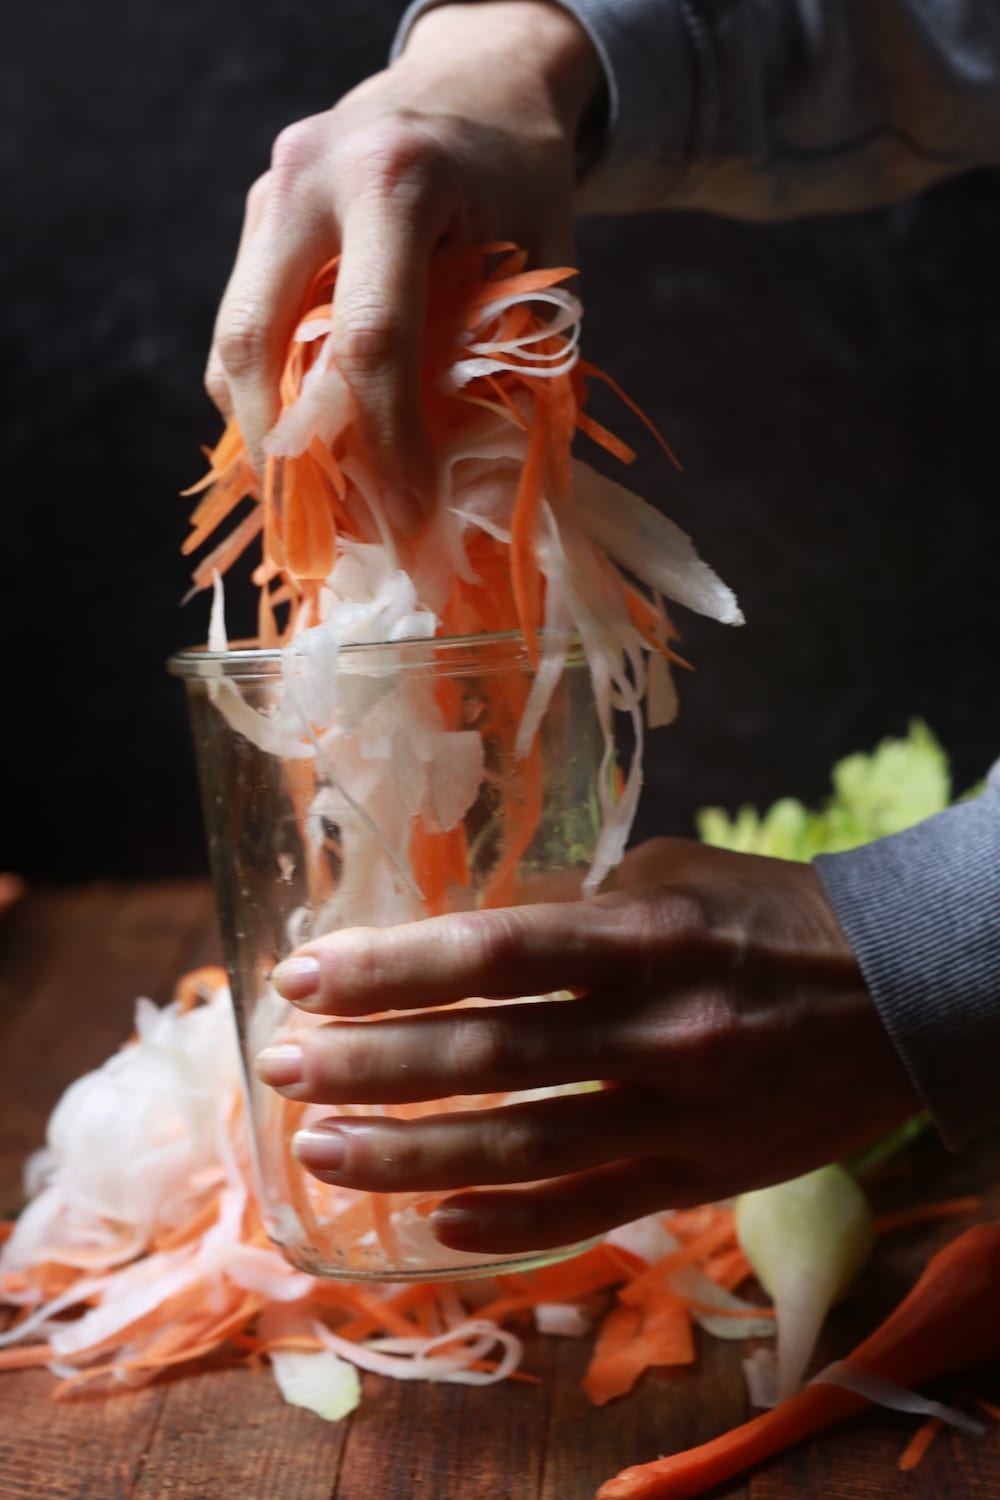 Stacy Lyn's hands putting daikon radishes and carrots in a. pickling jar